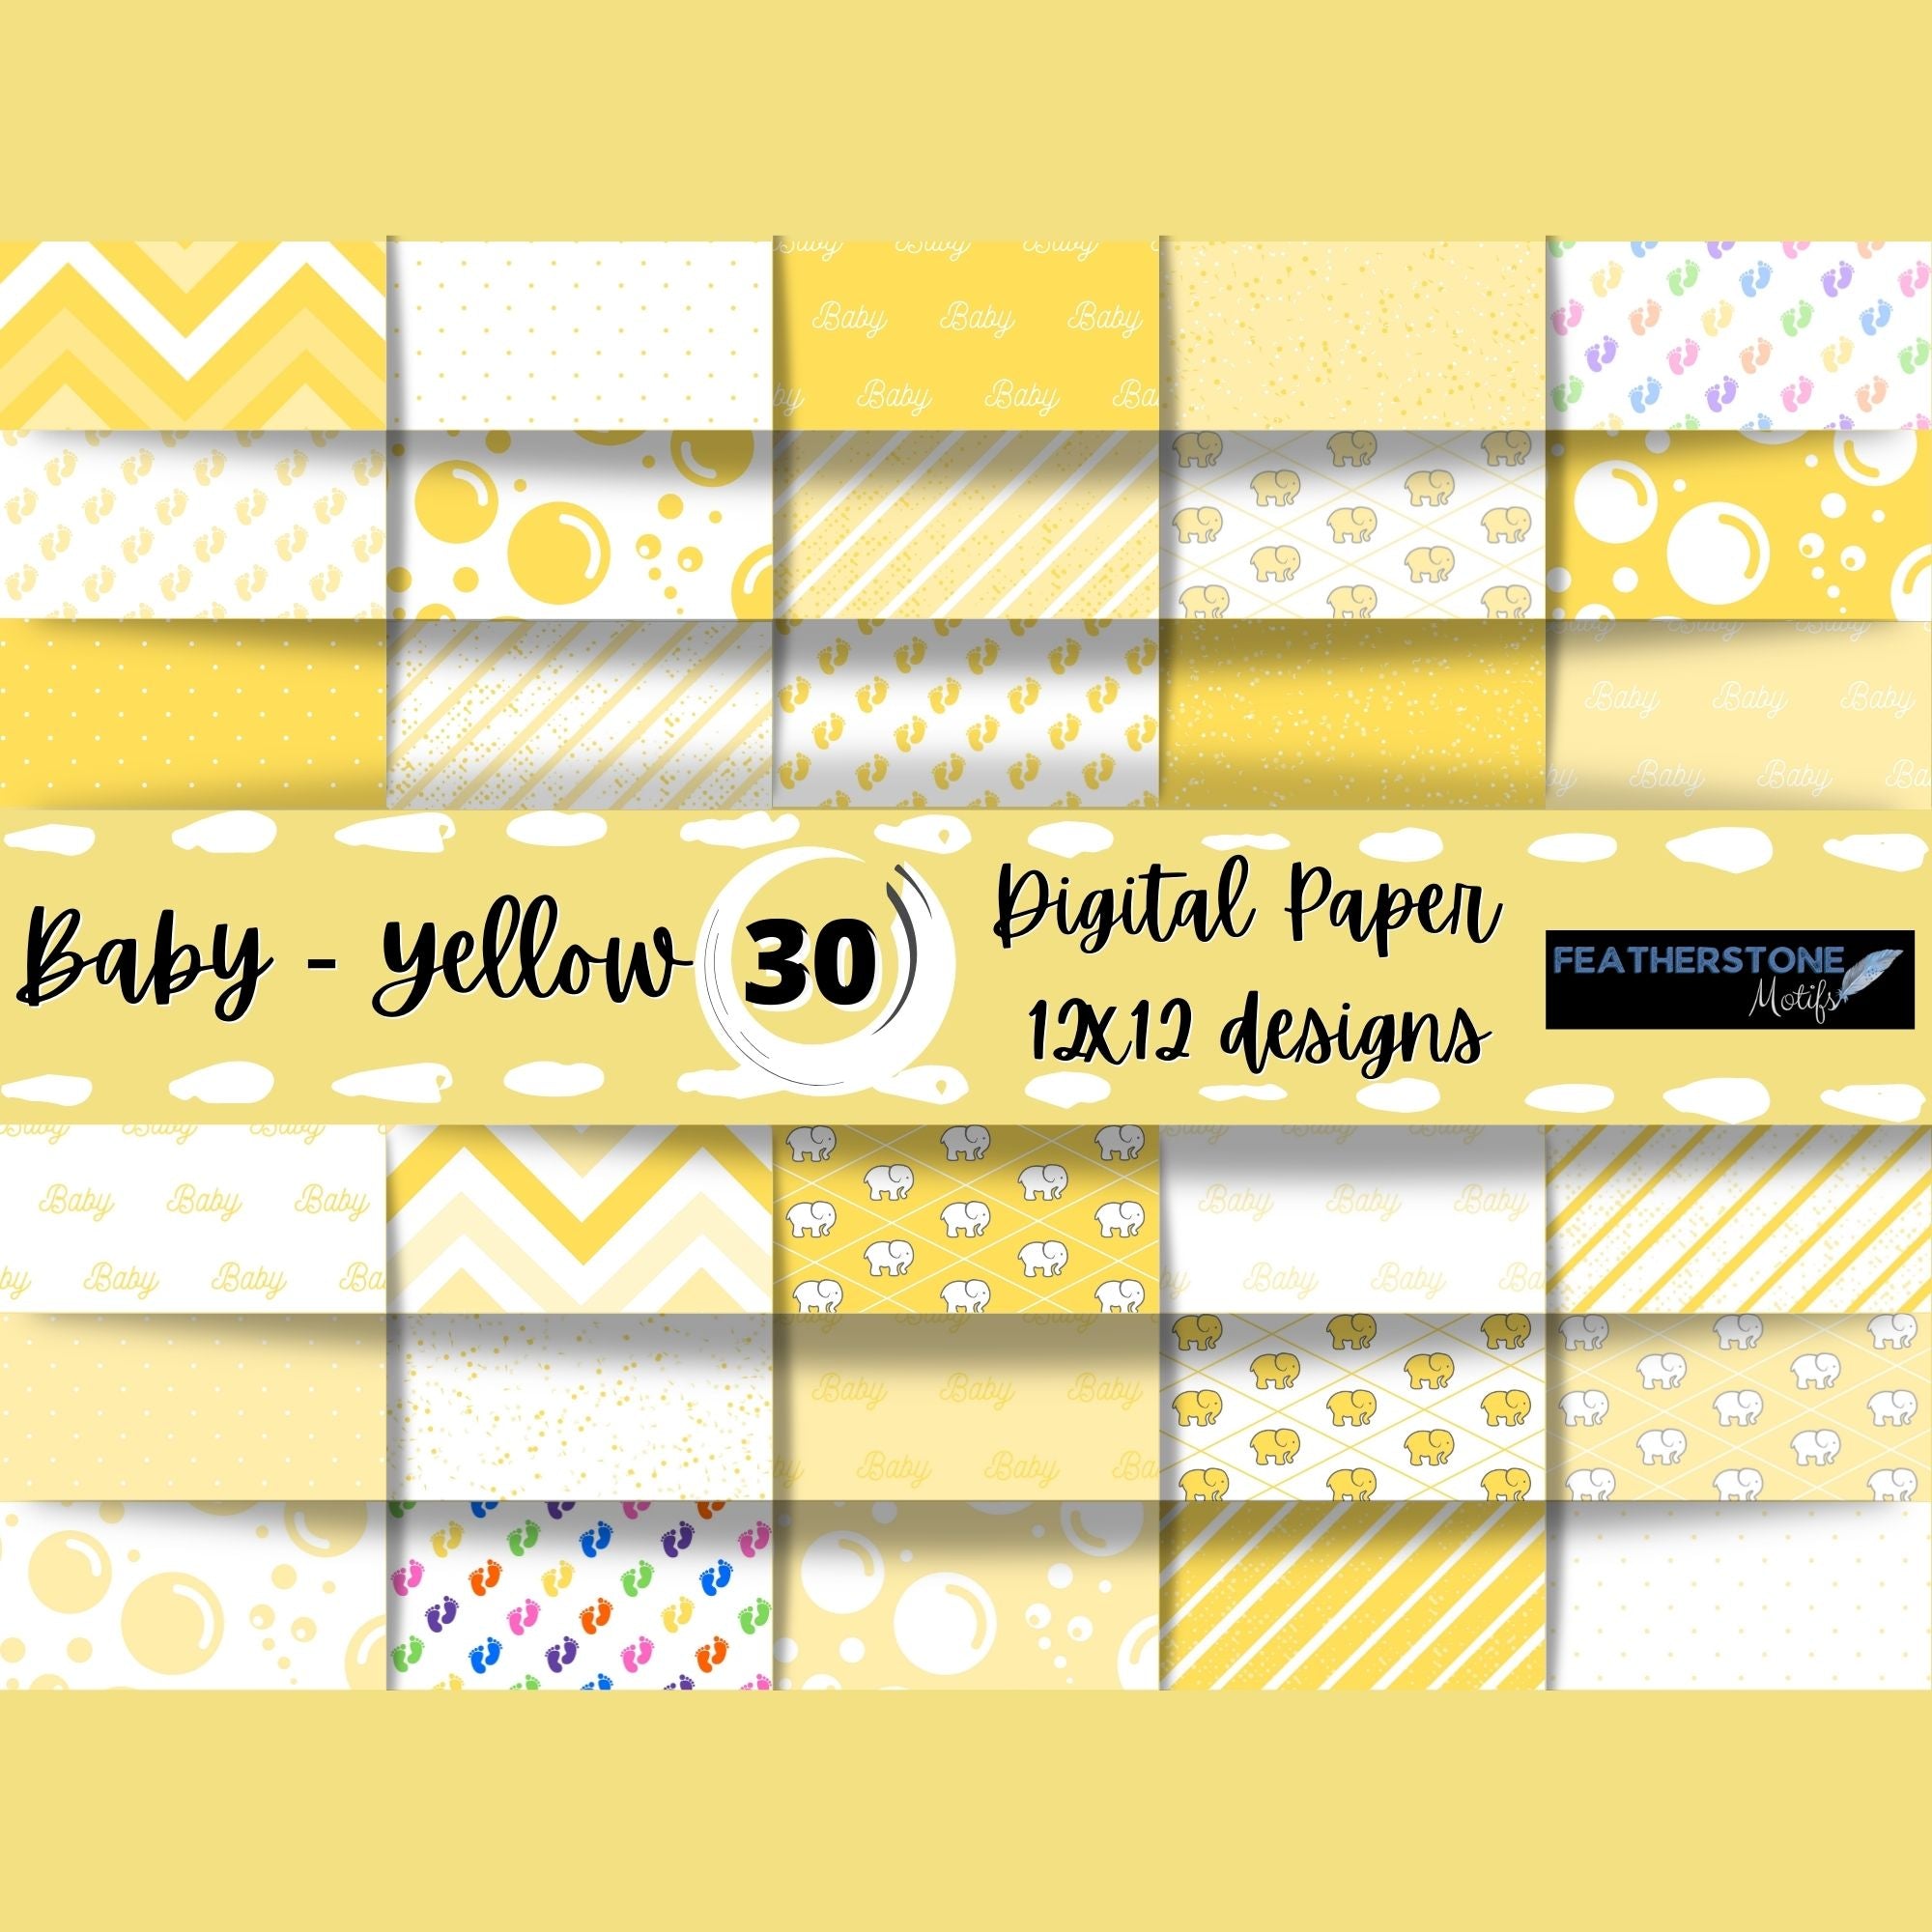 Scrapbookers, this is what you've been looking for! This yellow themed baby bundle has 30 unique images that can be printed or used as digital backgrounds.